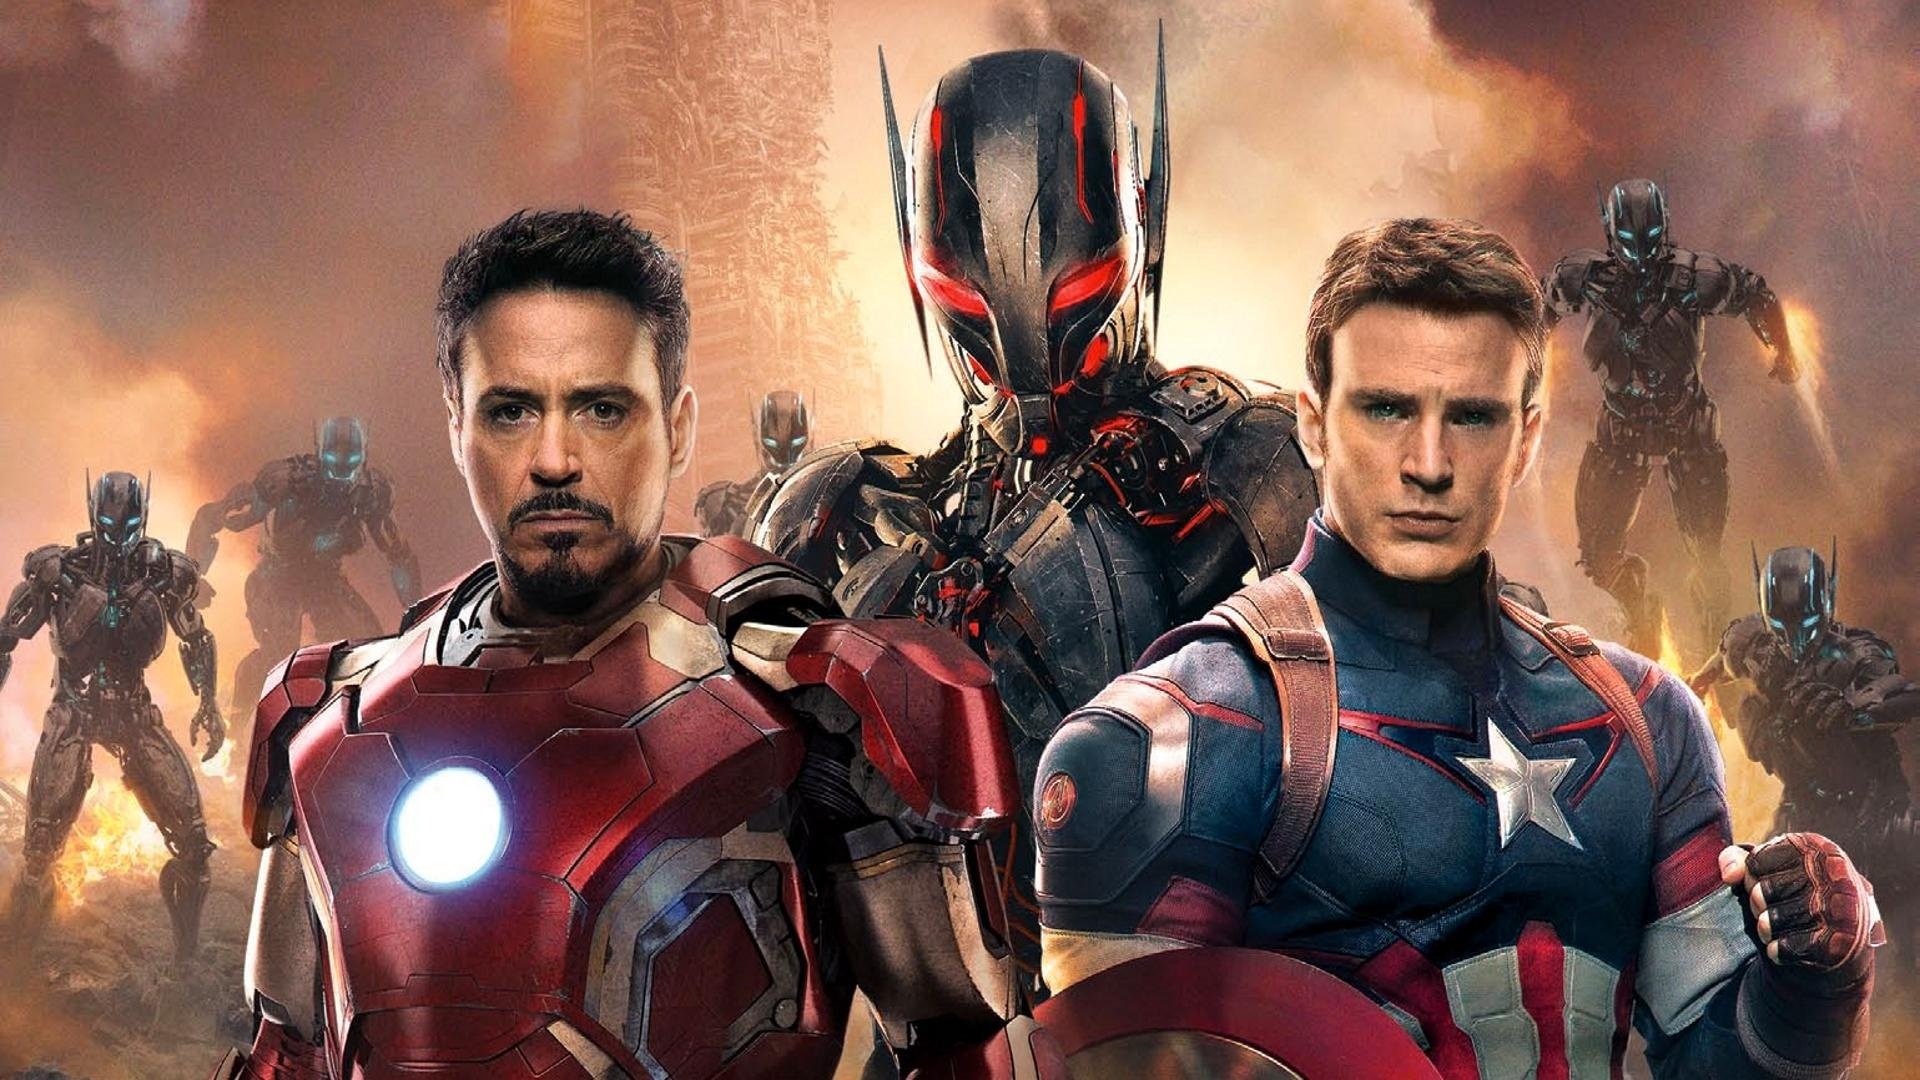 Iron Man and Captain America in Avengers Age of Ultron 2015 Wallpaper